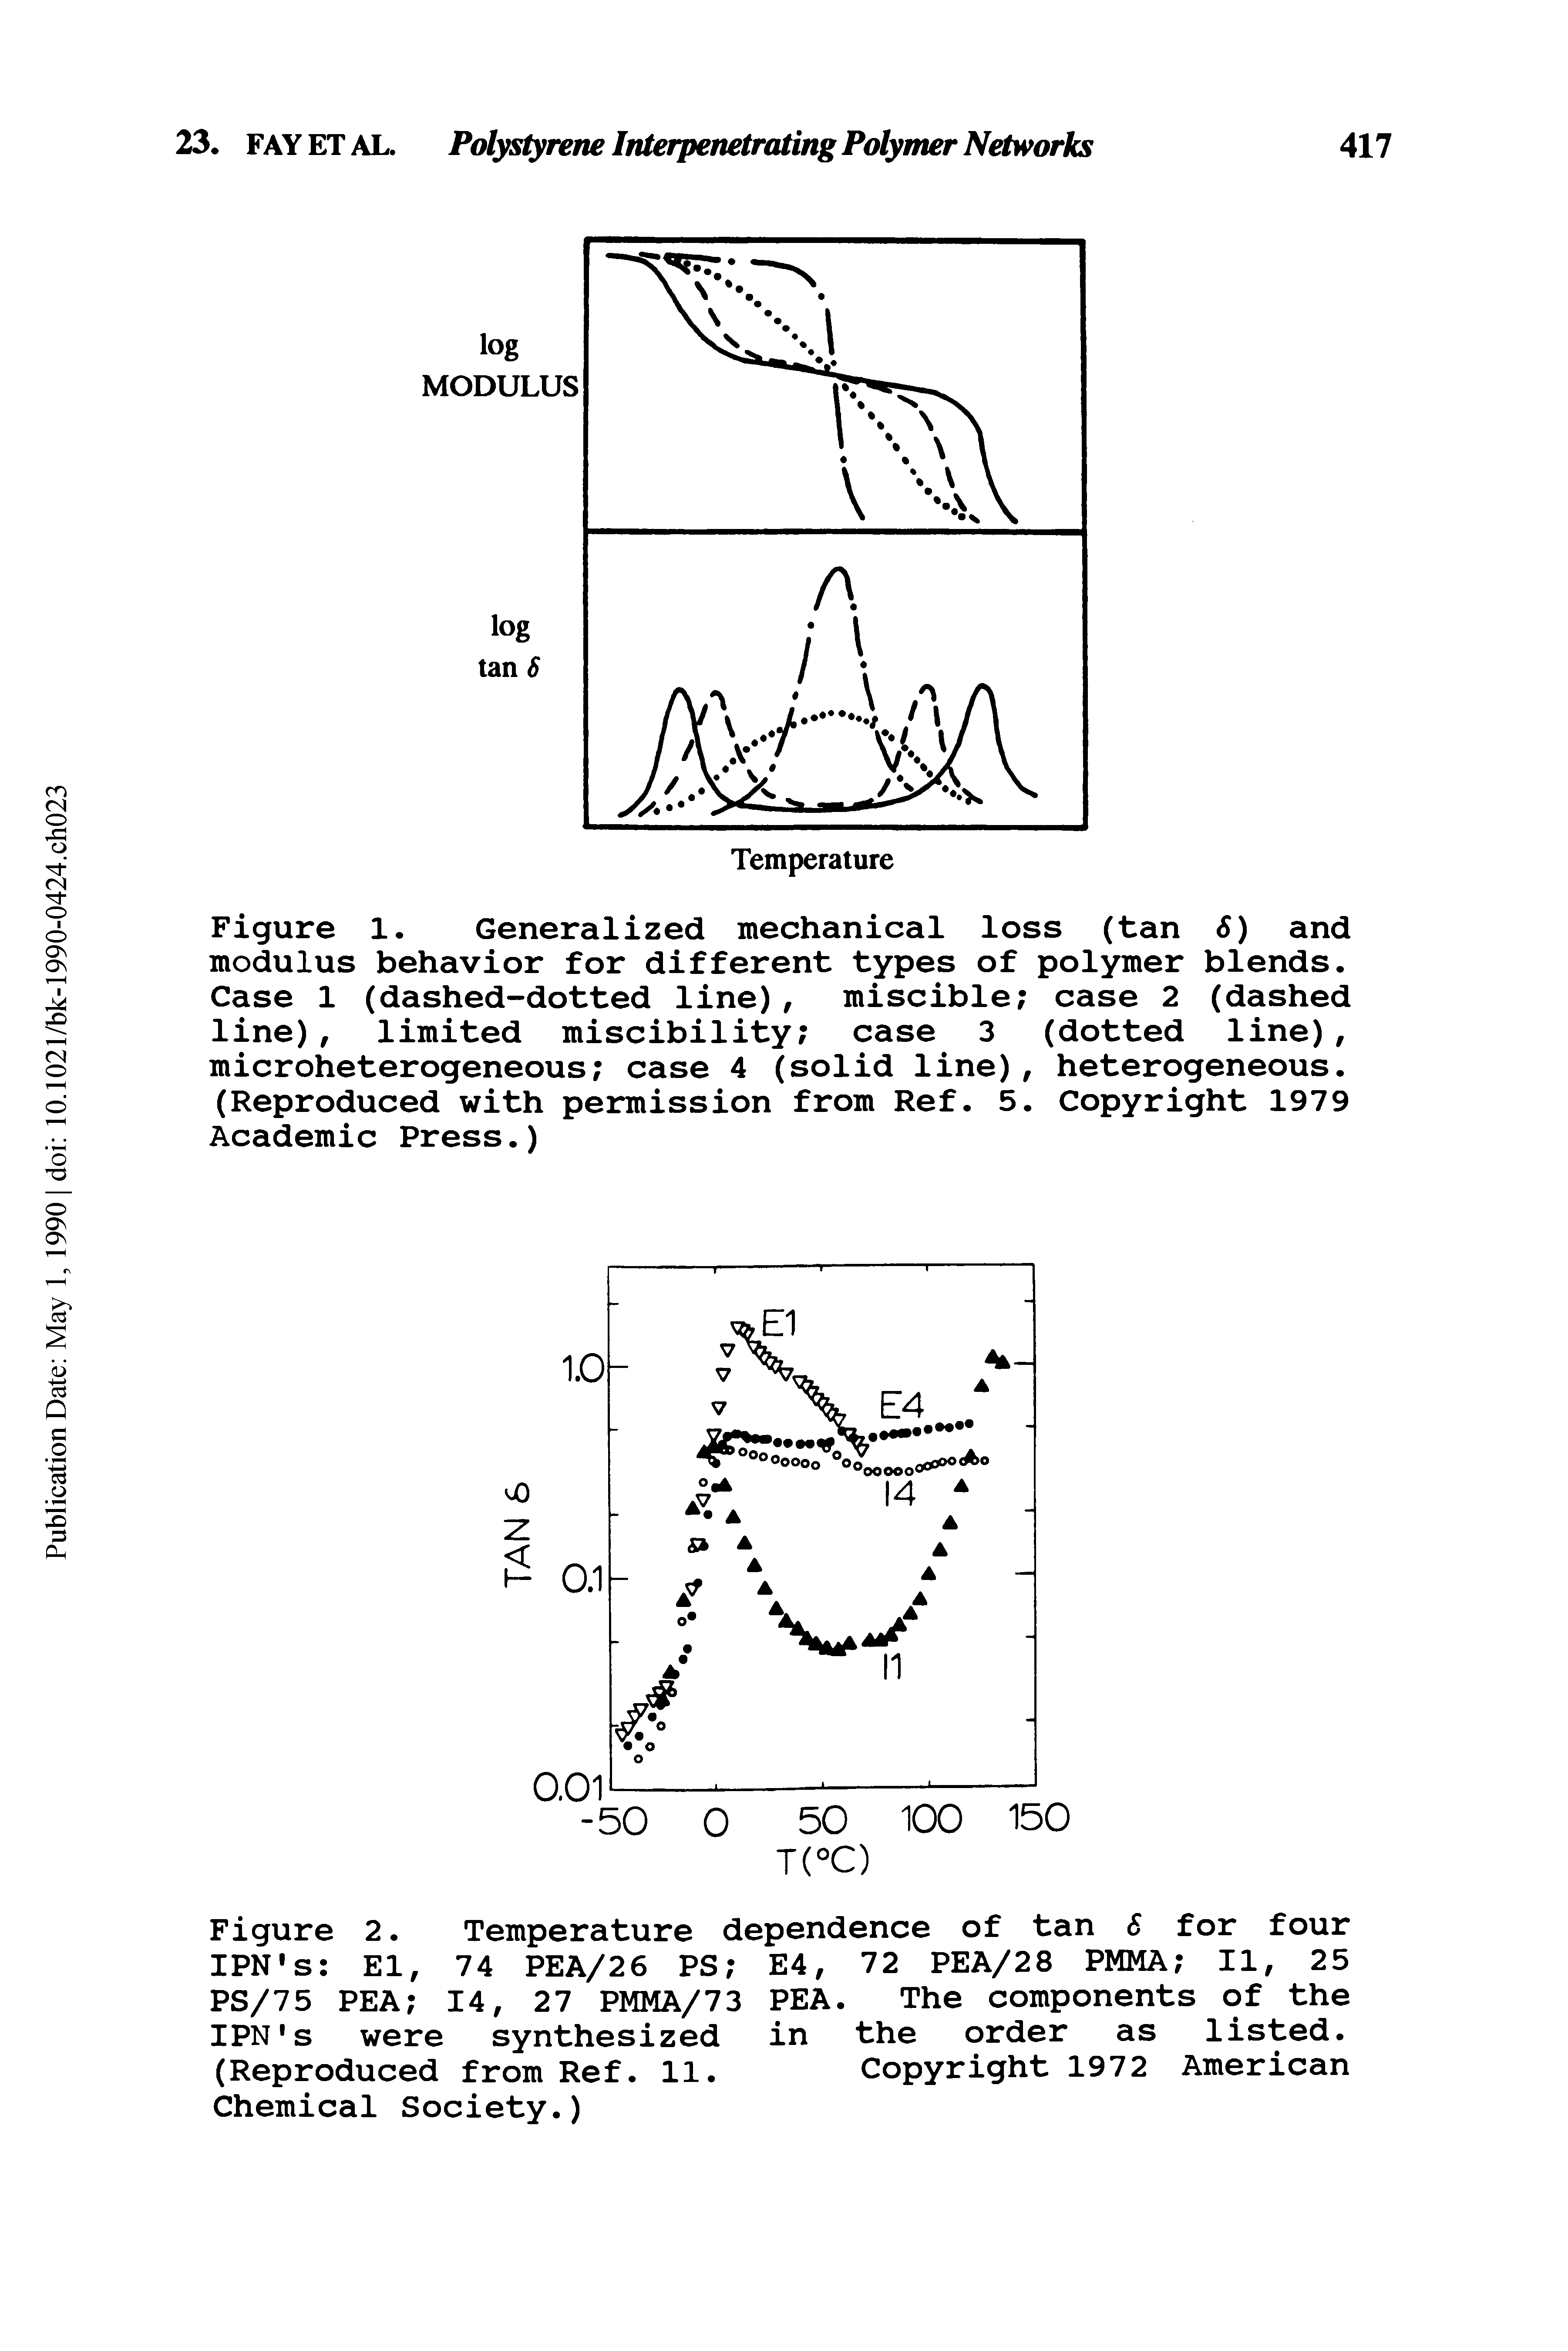 Figure 1. Generalized mechanical loss (tan S) and modulus behavior for different types of polymer blends. Case 1 (dashed-dotted line), miscible case 2 (dashed line), limited miscibility case 3 (dotted line), microheterogeneous case 4 (solid line), heterogeneous. (Reproduced with permission from Ref. 5. Copyright 1979 Academic Press.)...